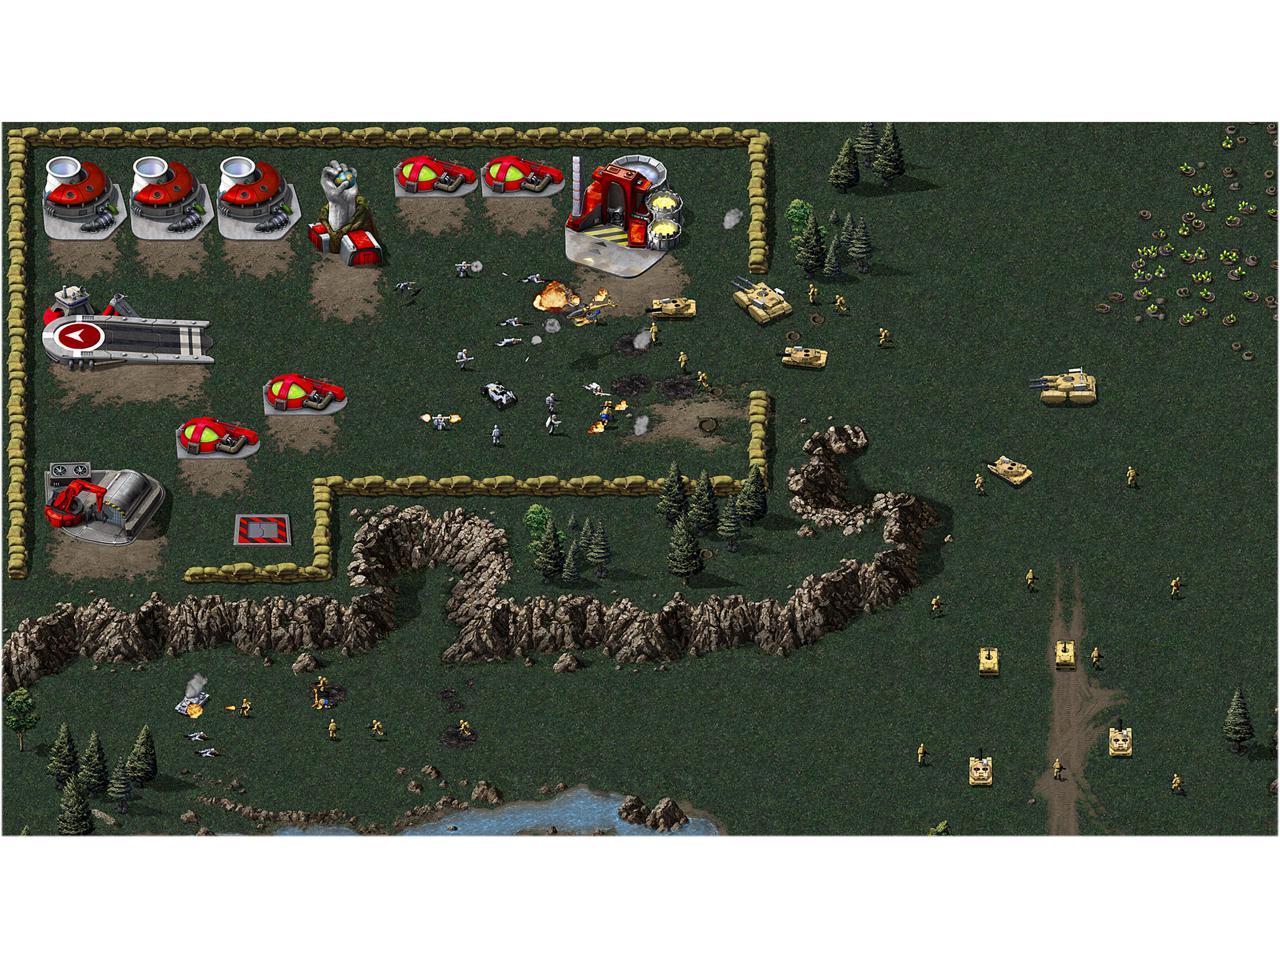 command and conquer 3 pc key binding